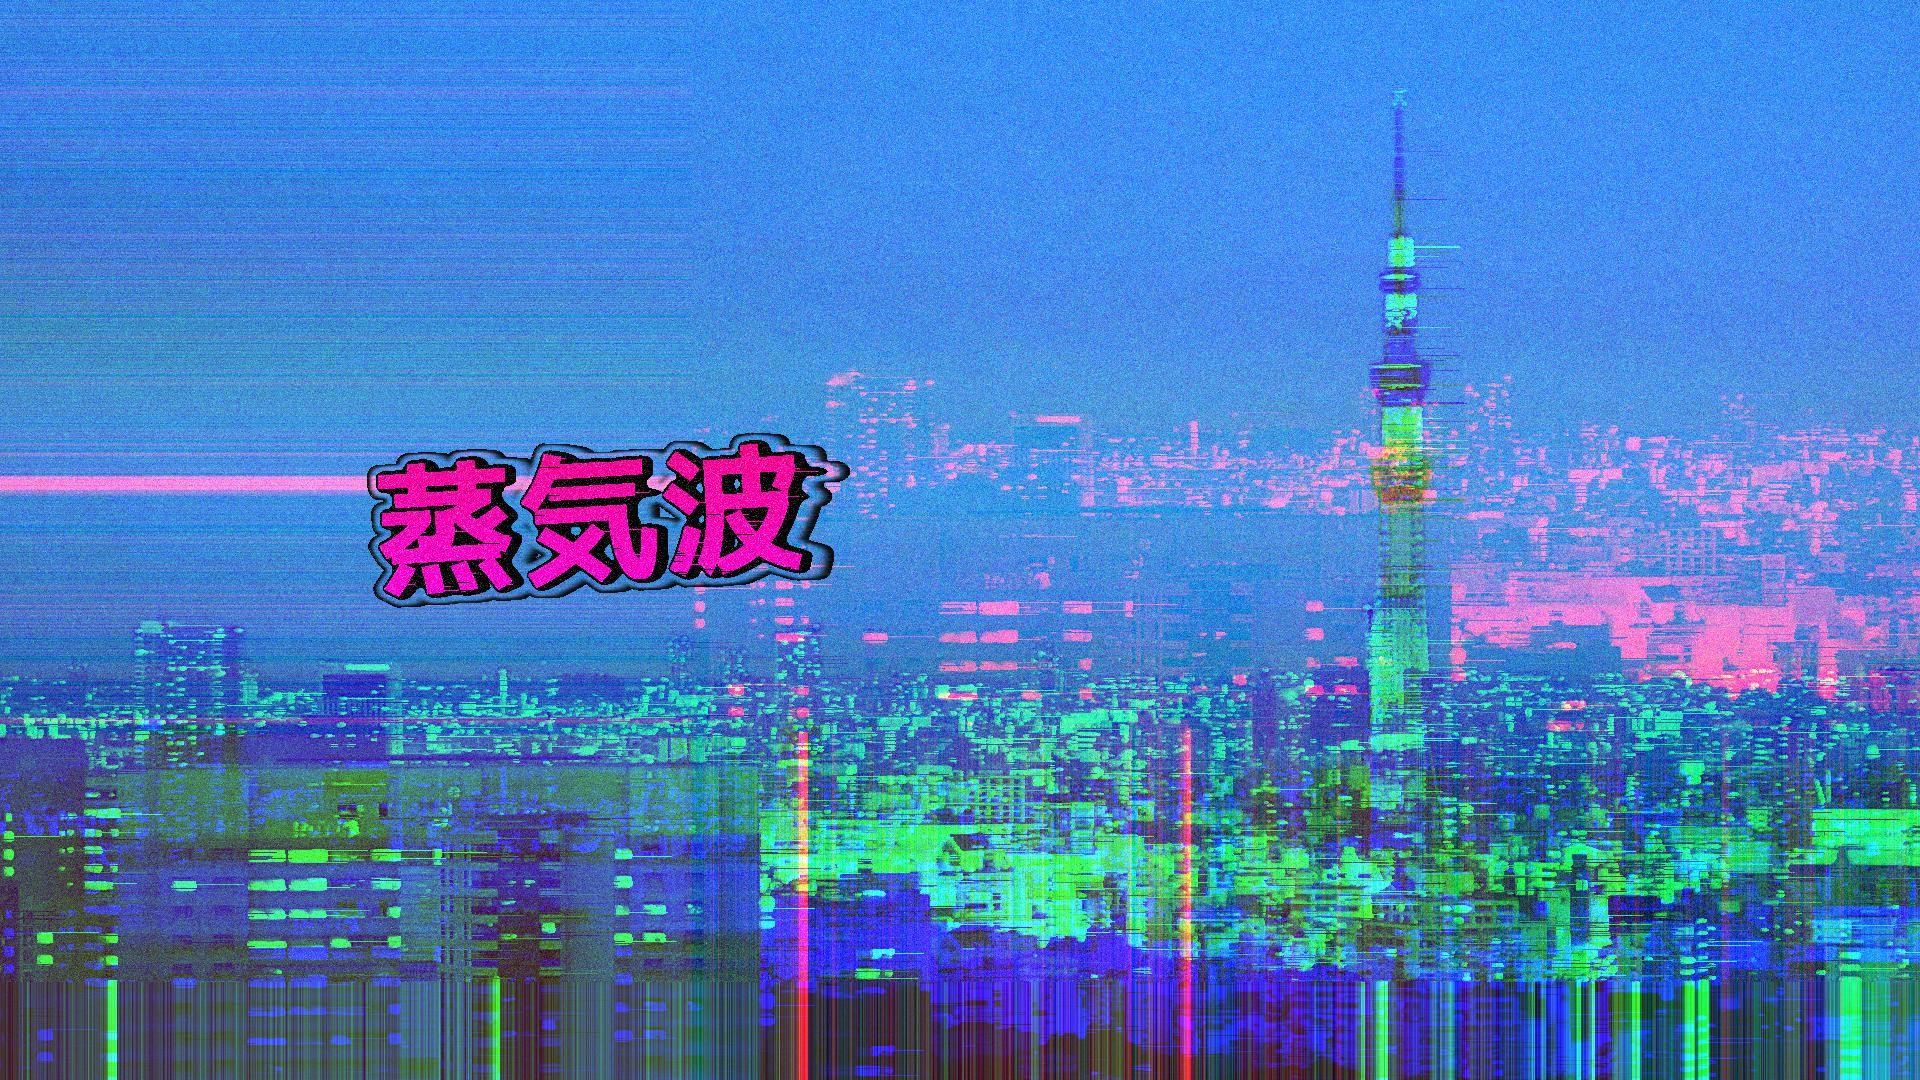 Vaporwave wallpaper 1920x1080 ·① Download free awesome full HD ...